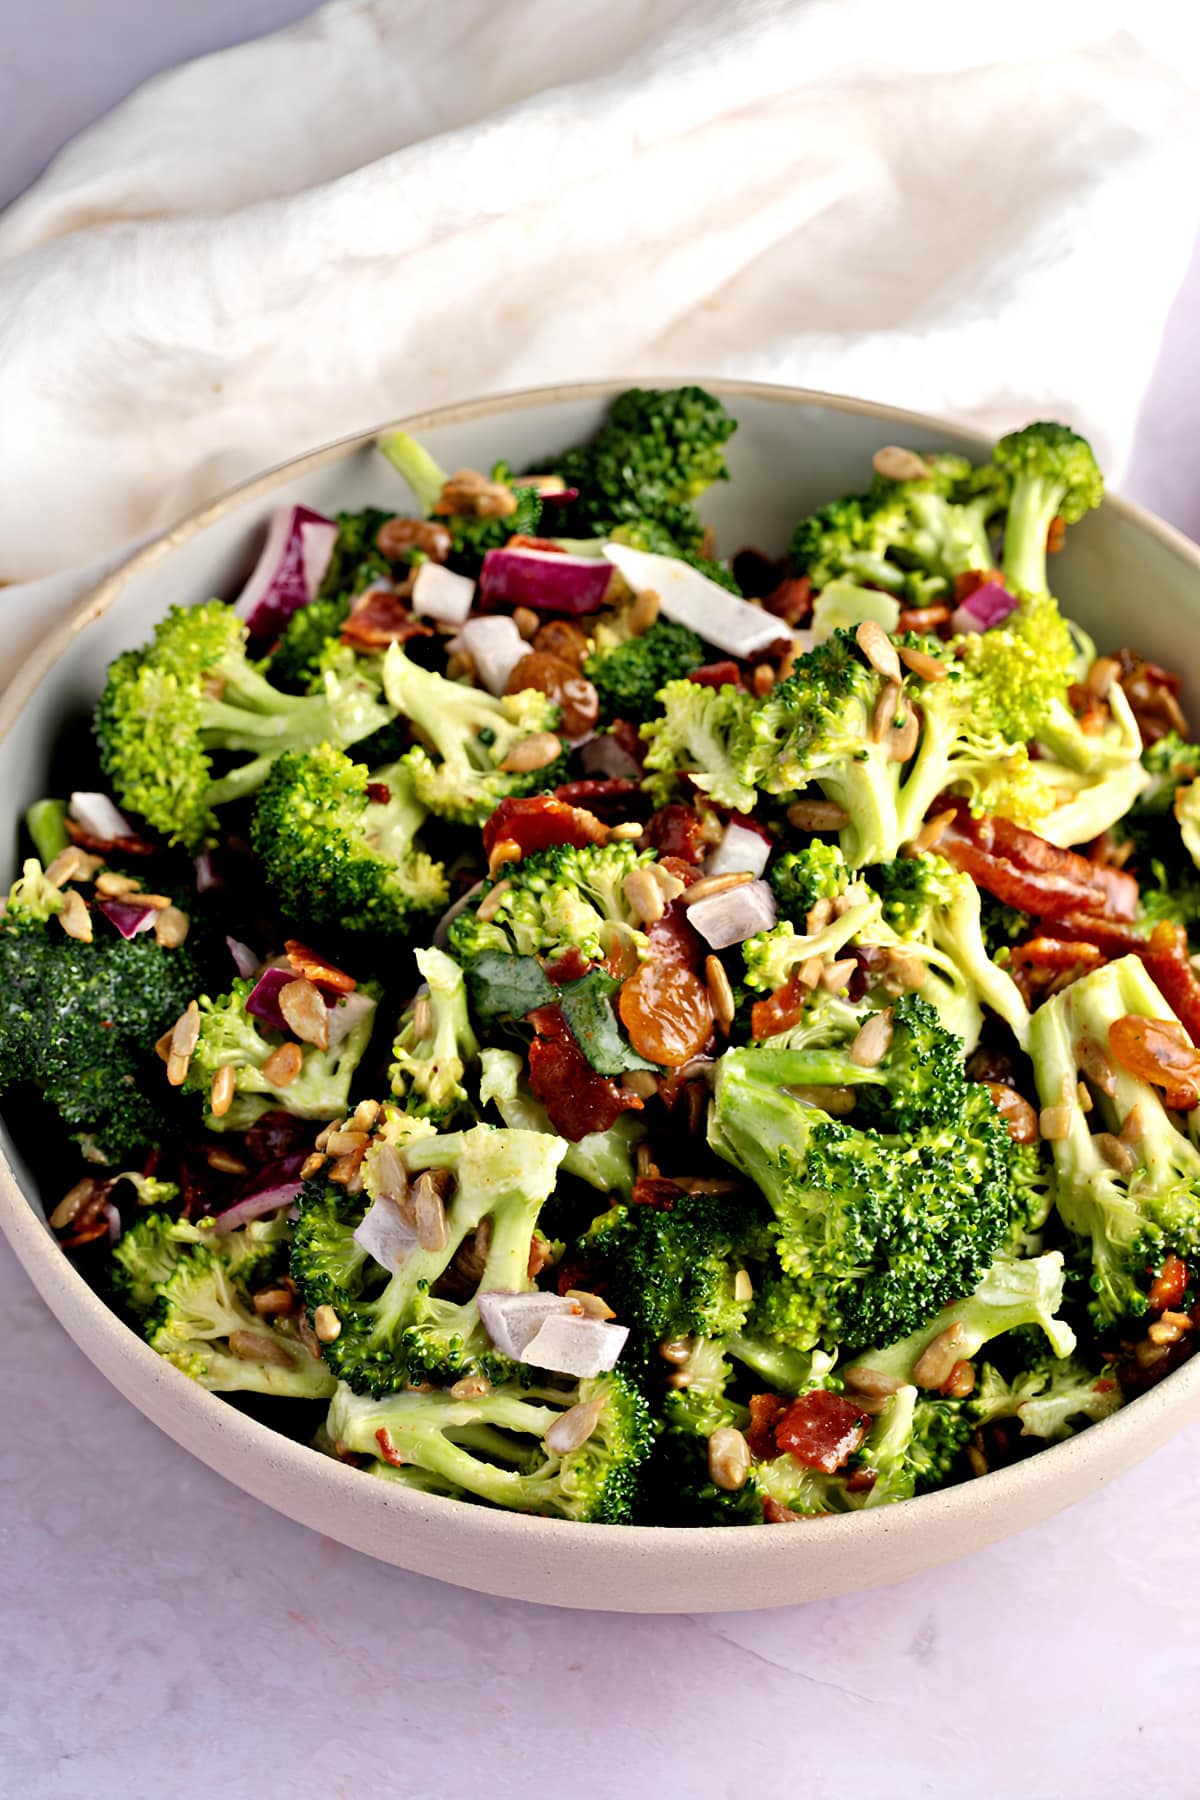 Bowl of broccoli salad with crumbled bacon, raisins, red onions and sunflower seed nuts